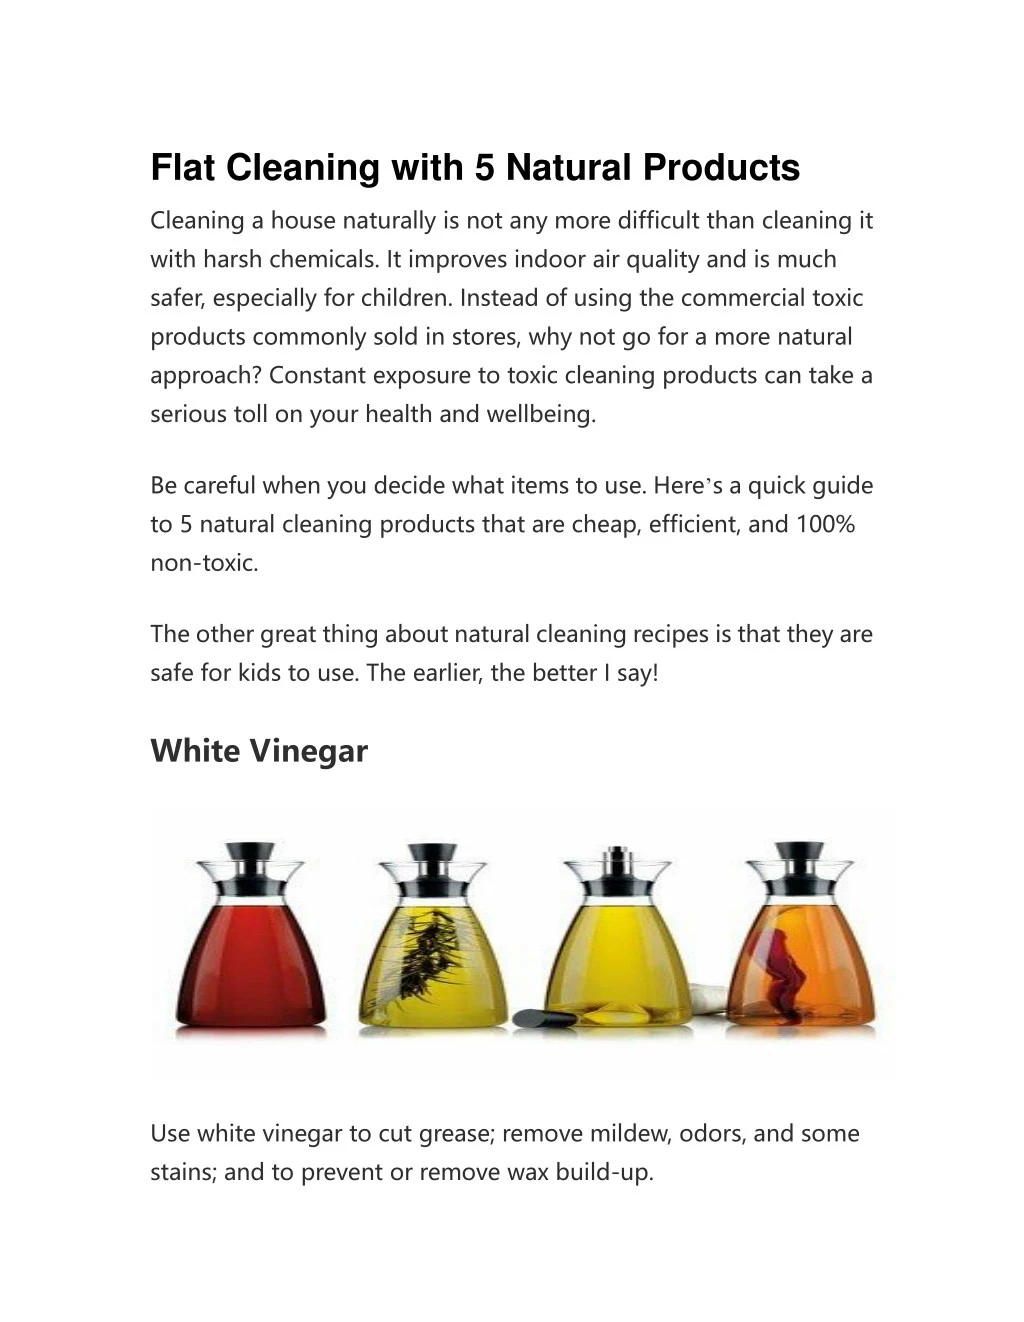 flat cleaning with 5 natural products